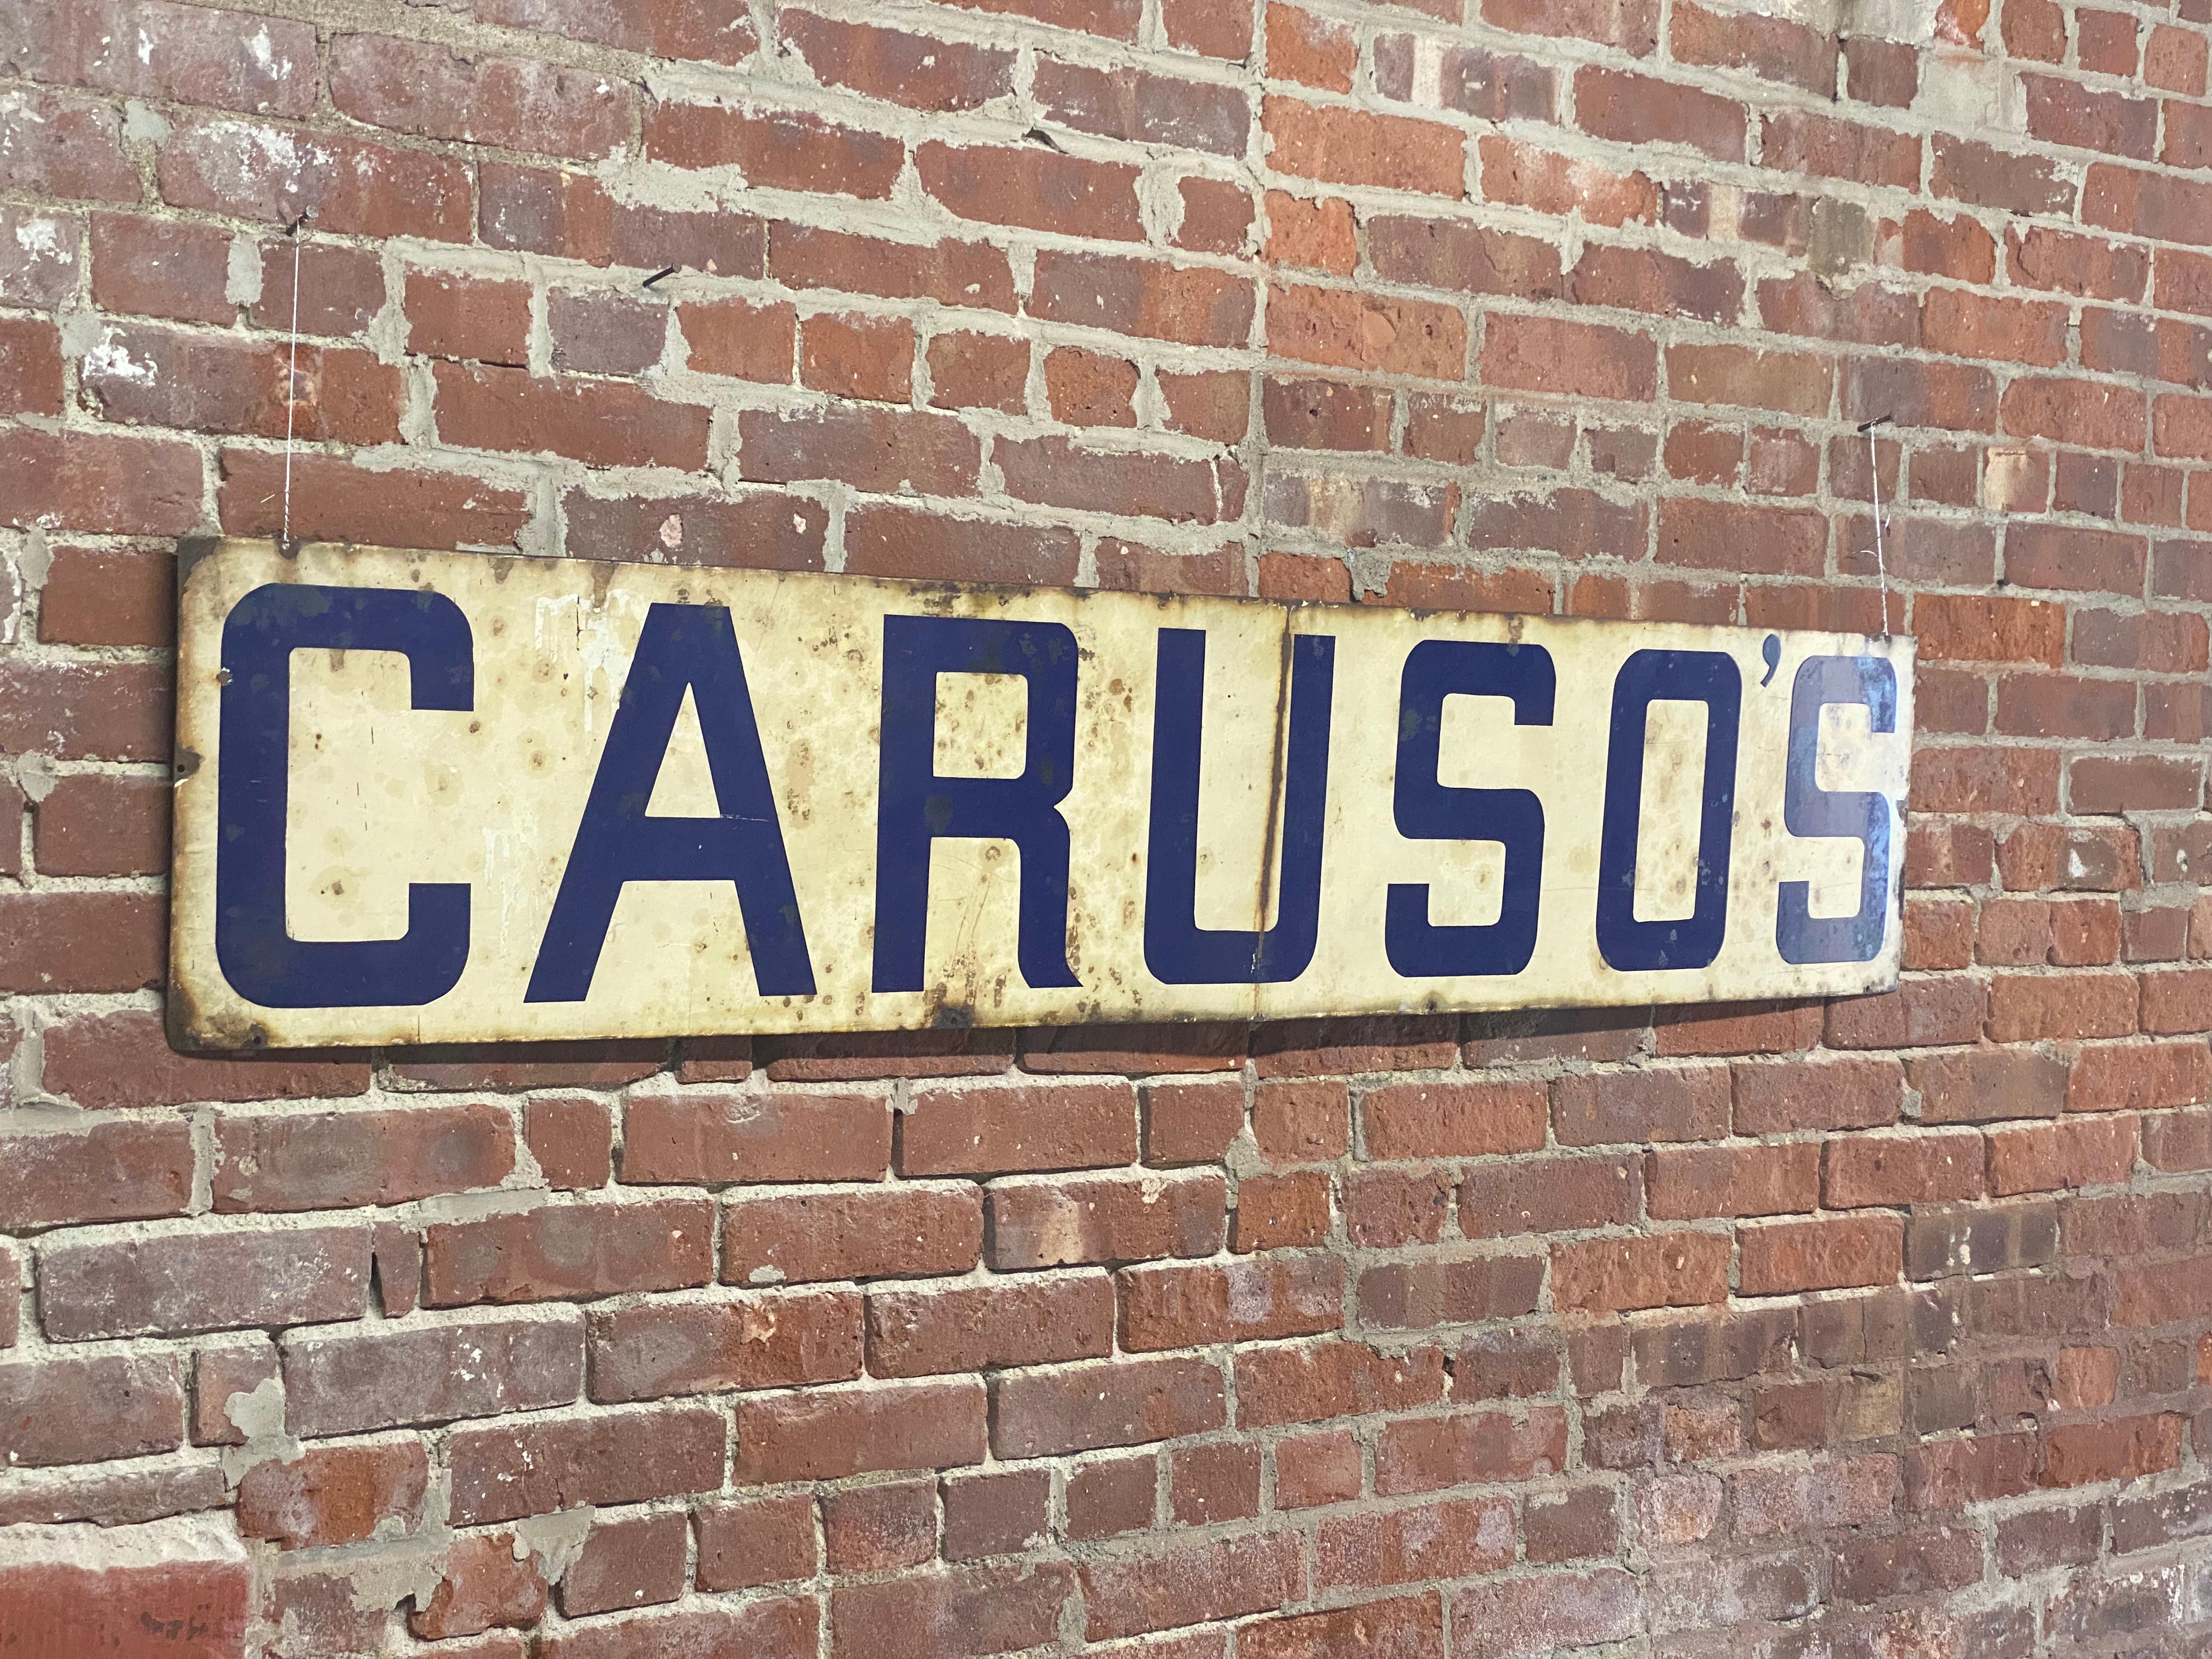 Industrial 1930s Caruso's Old New York Restaurant Enamel Sign For Sale